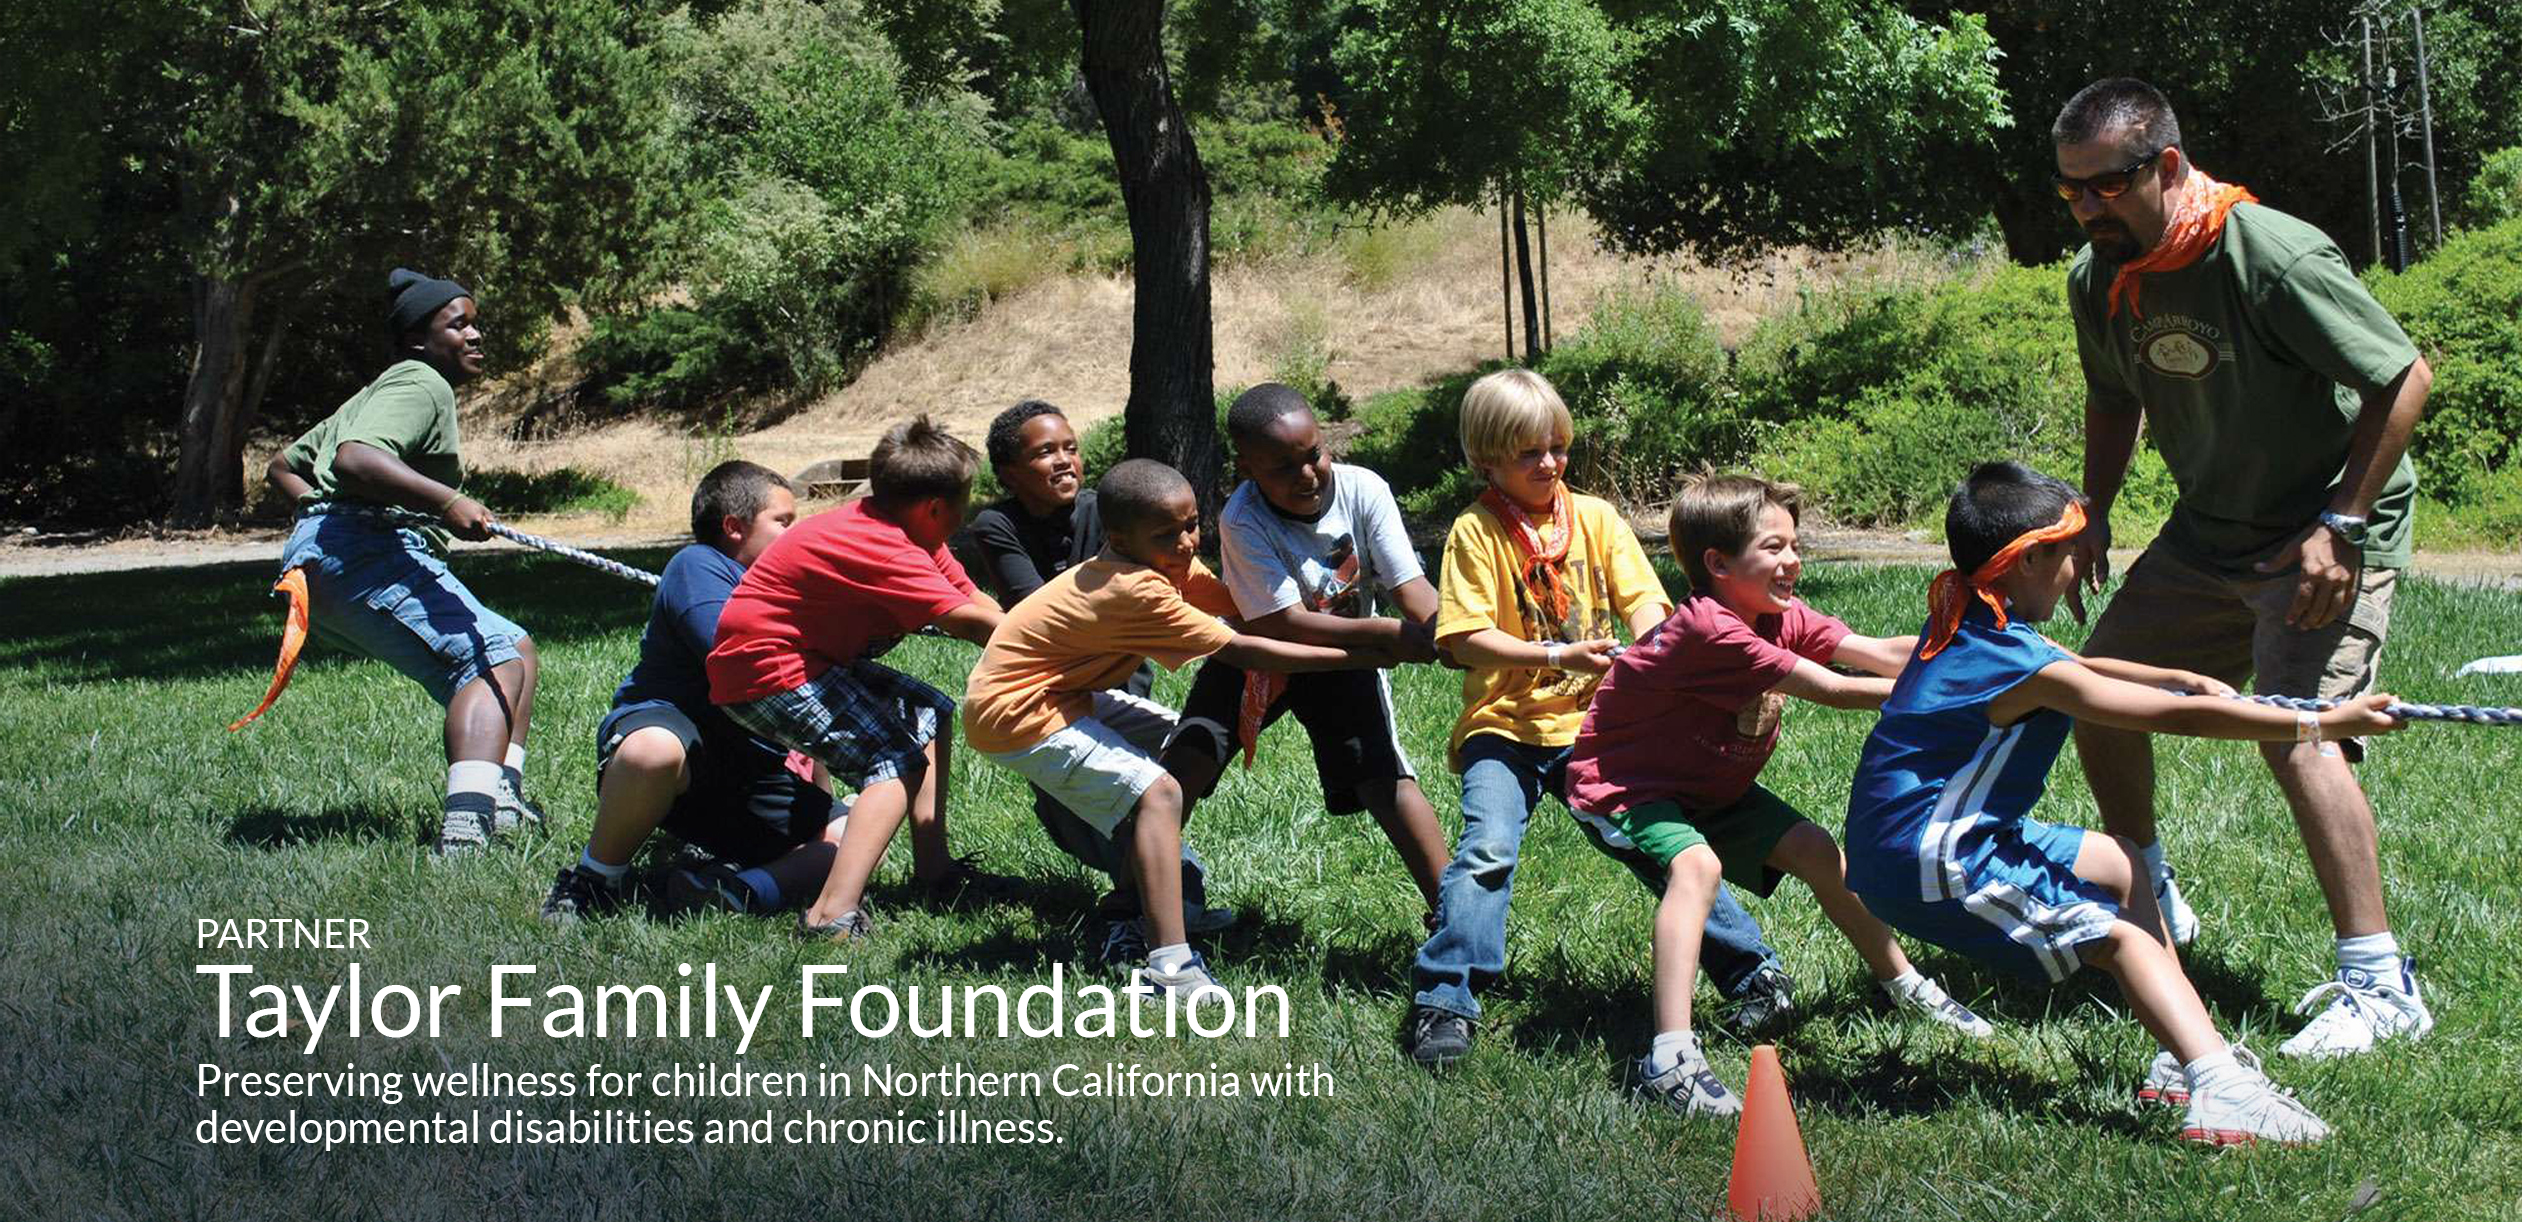 PARTNER Taylor Family Foundation Preserving wellness for children in Northern California with developmental disabilities and chronic illness.